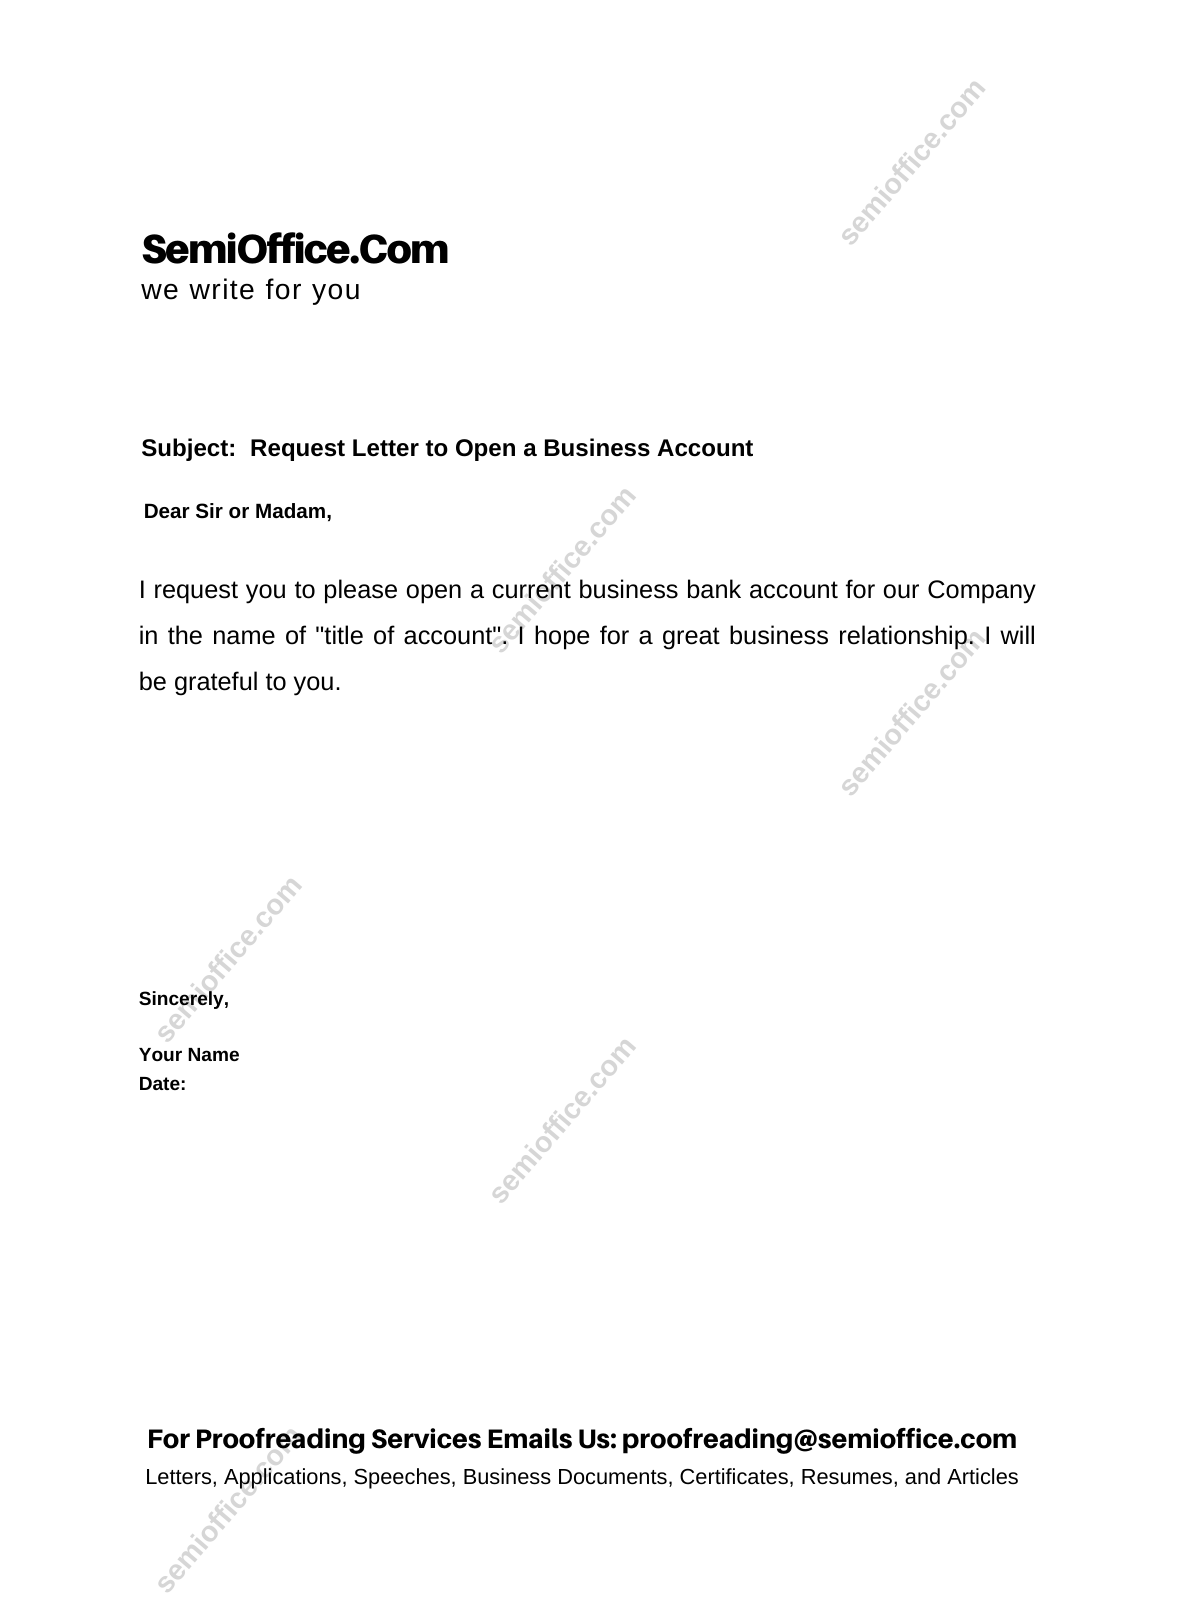 application letter for opening a company bank account